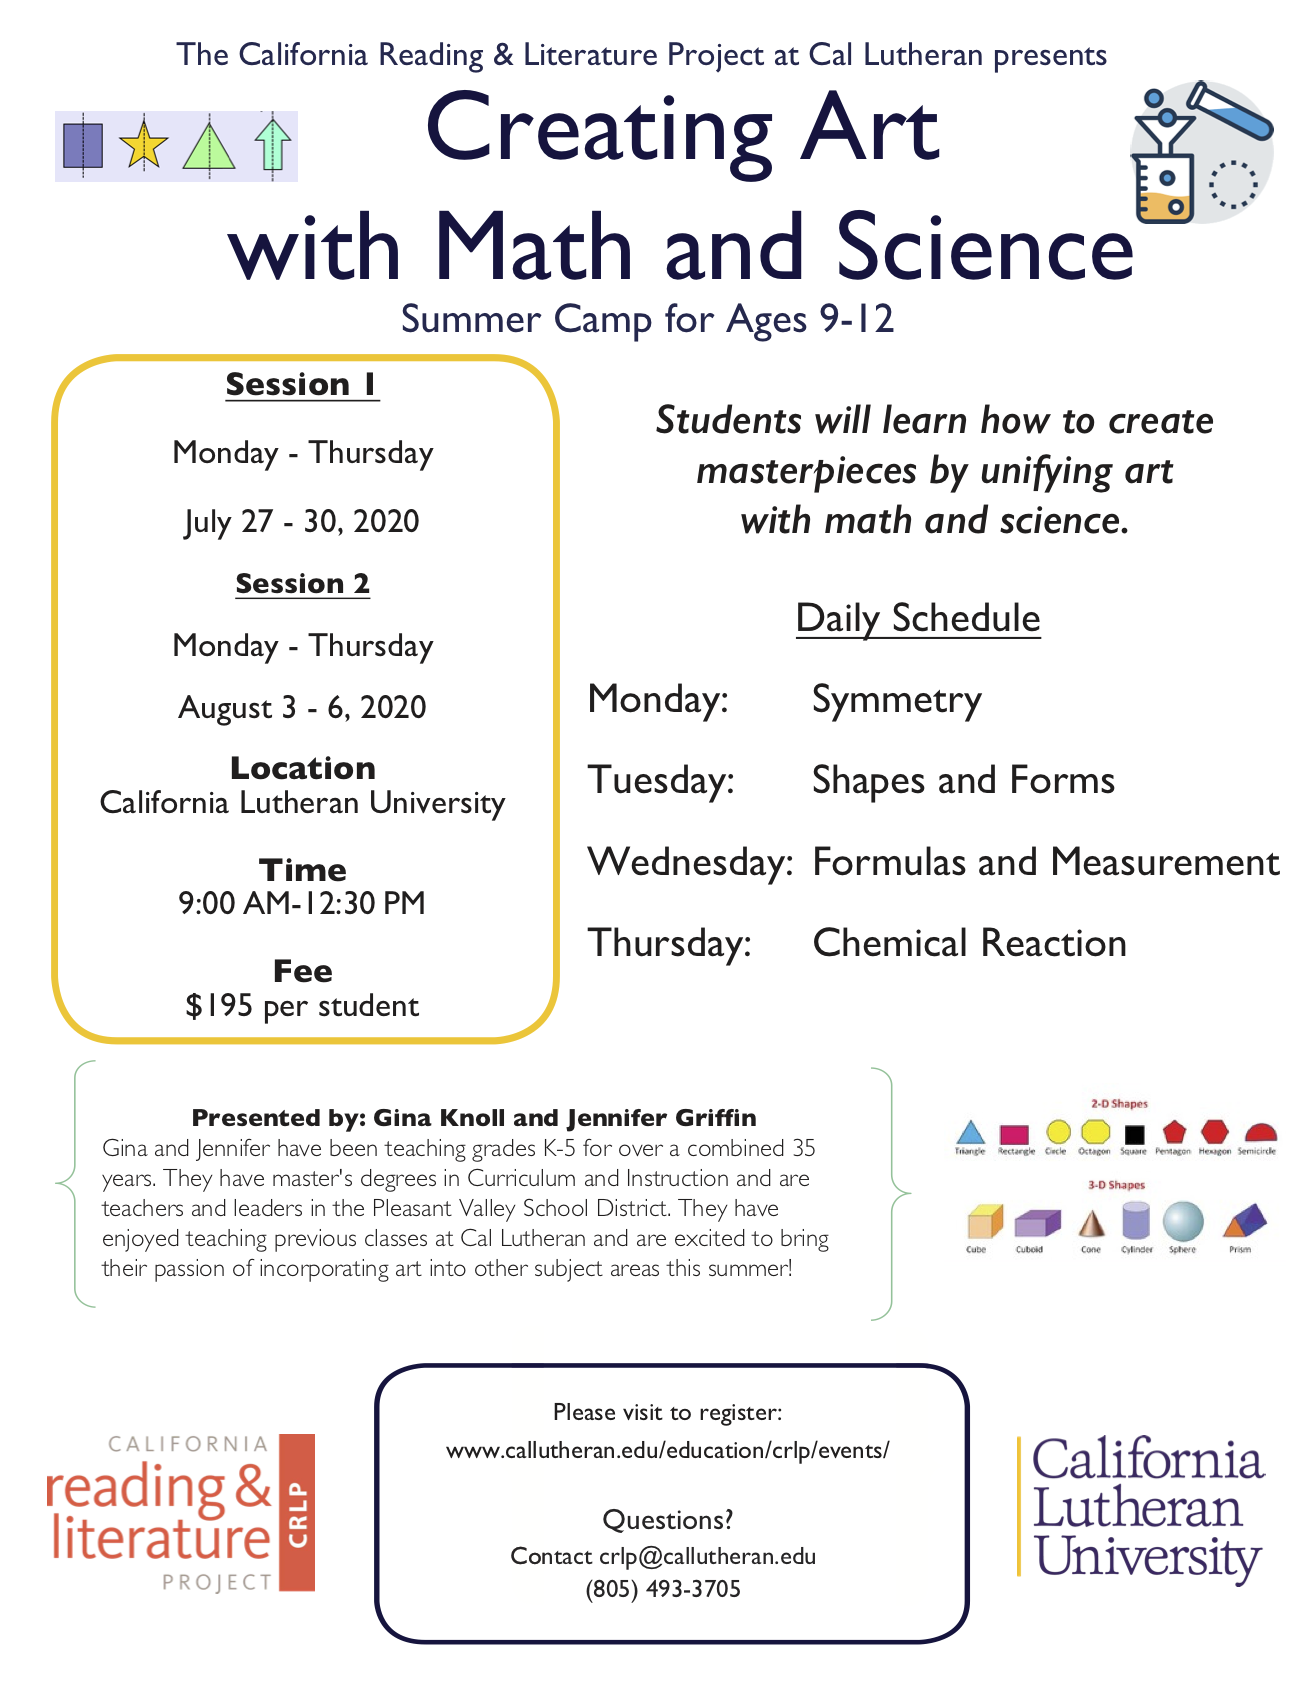 Creating Art with Math and Science Flyer